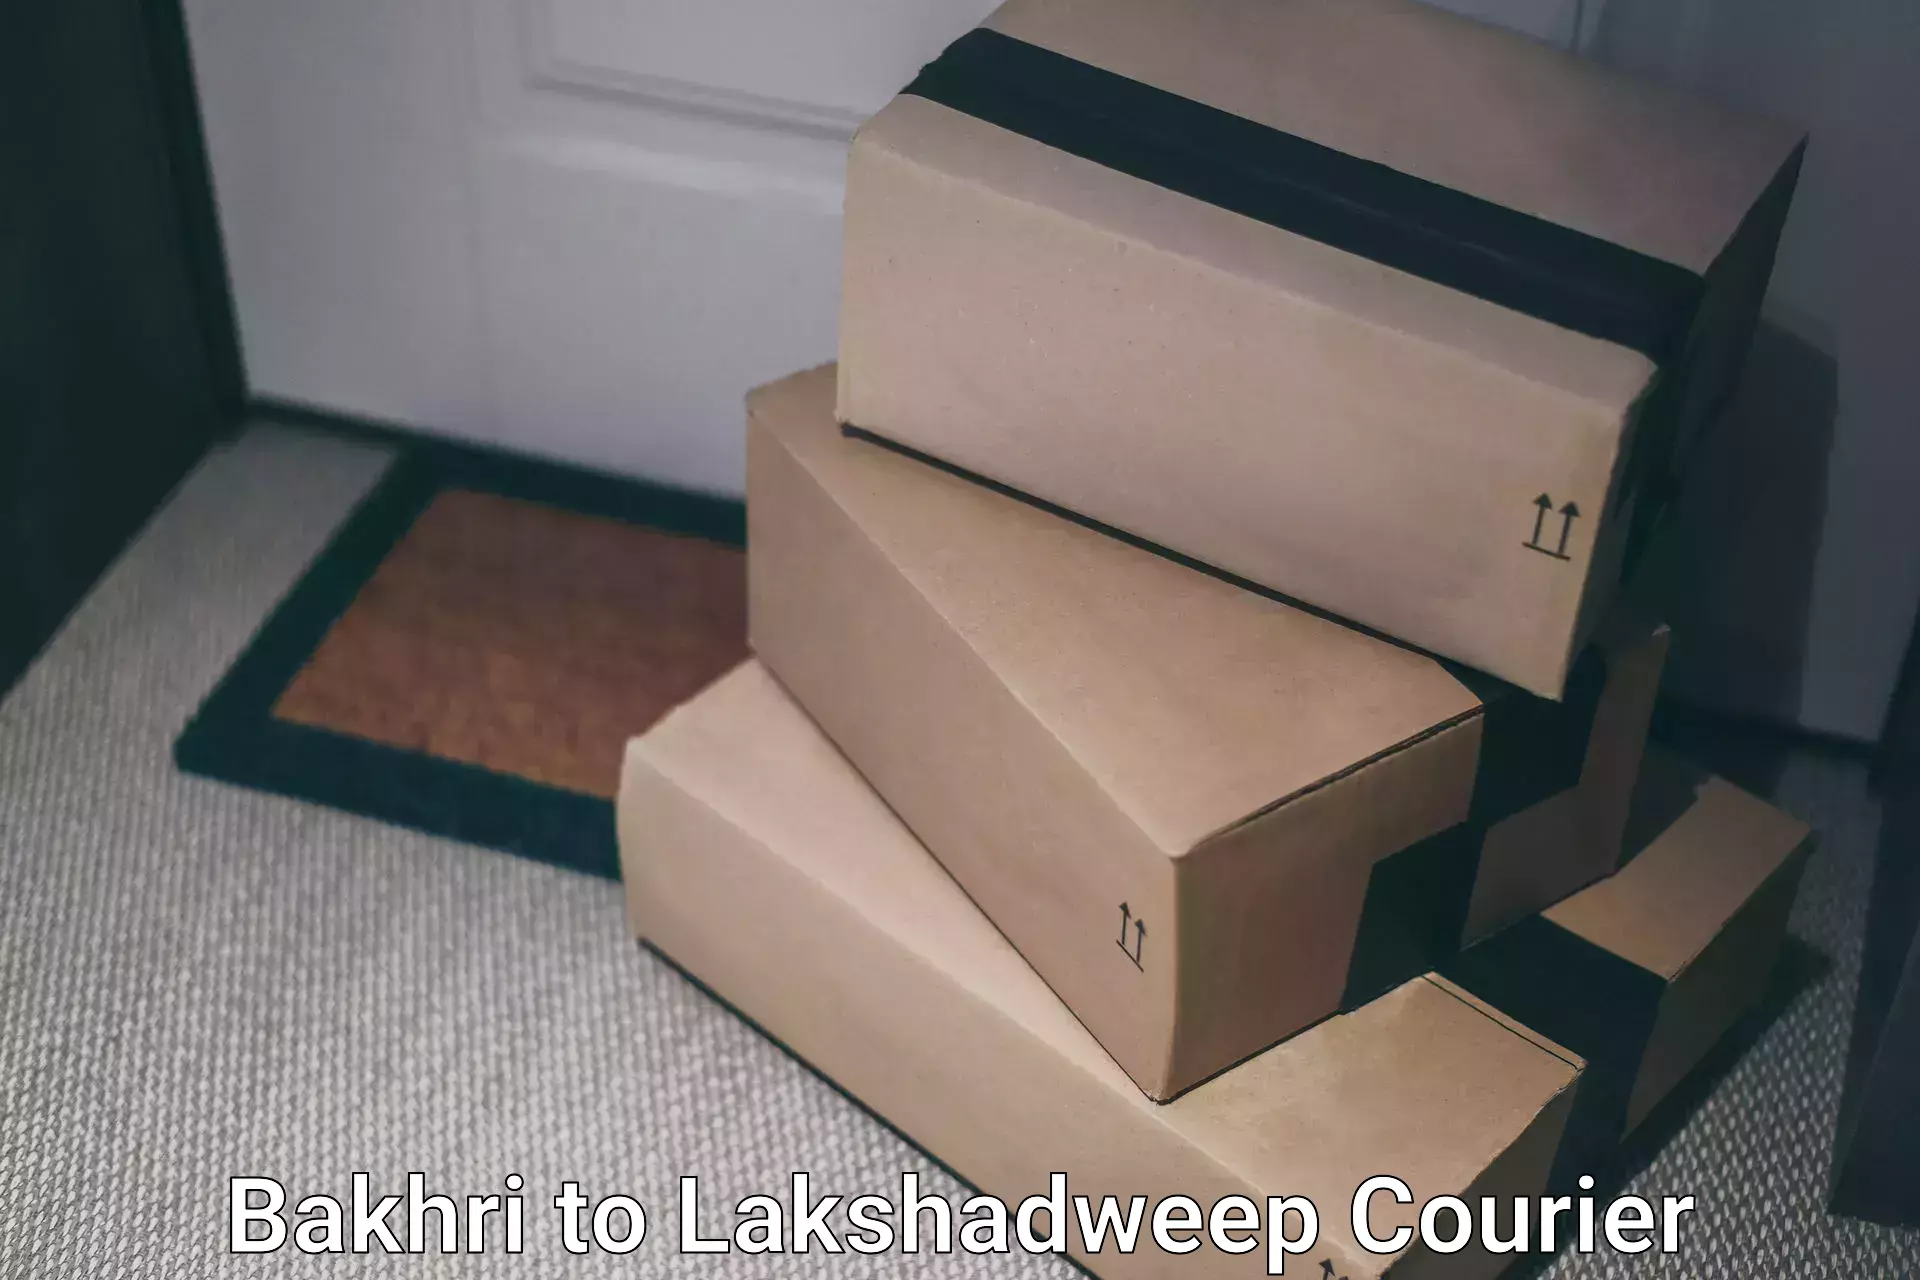 Speedy delivery service Bakhri to Lakshadweep